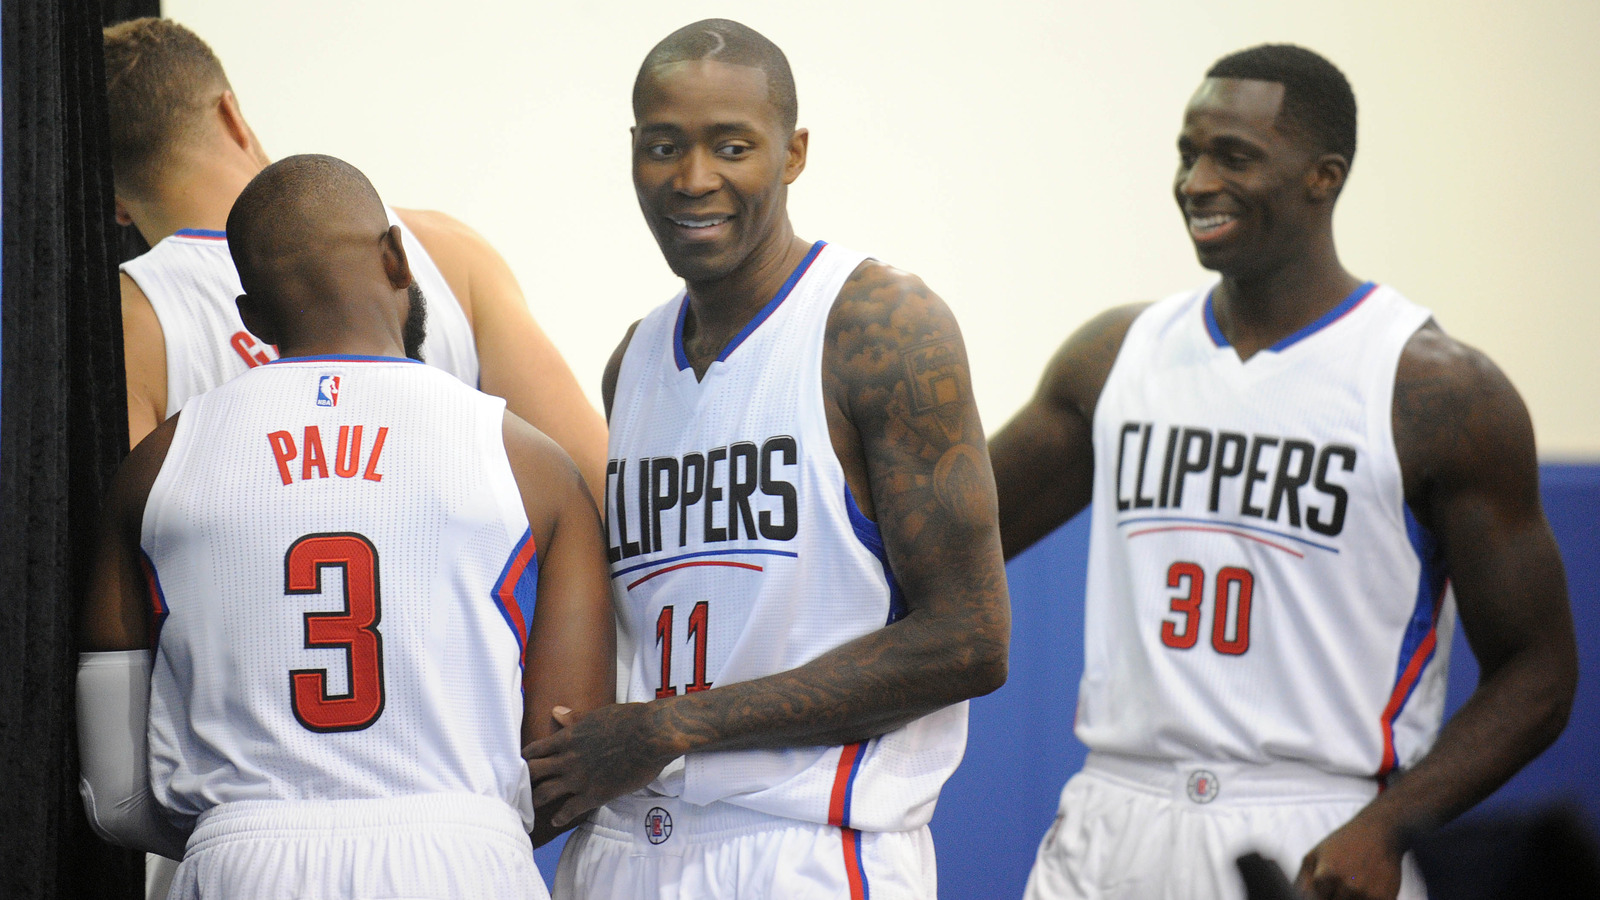 crawford jersey clippers